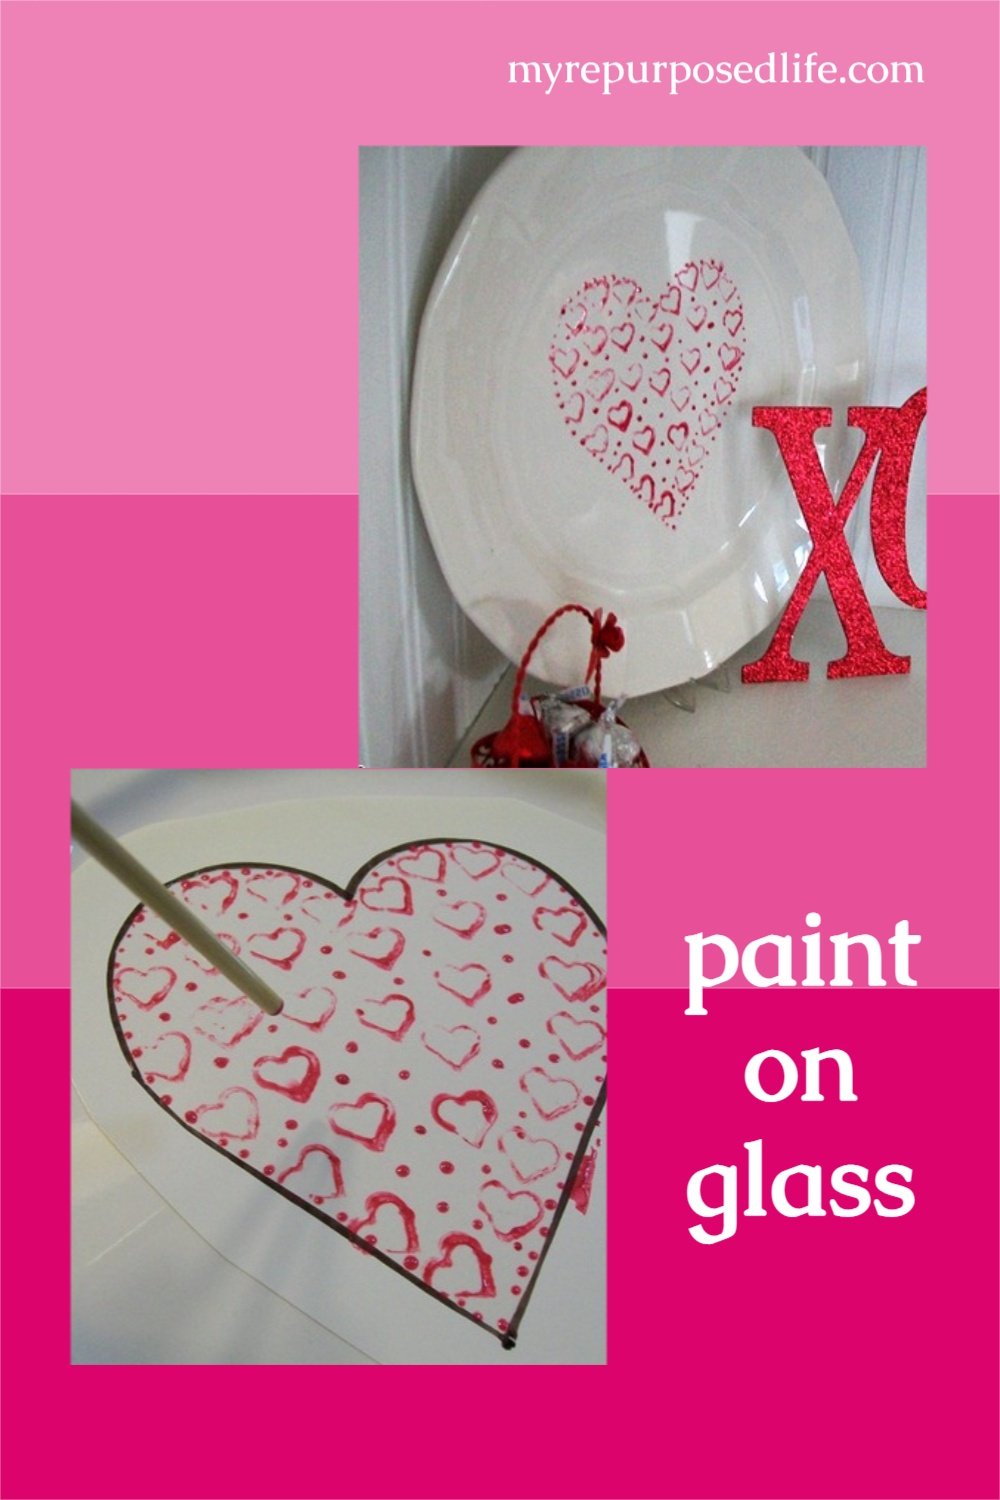 How to paint on glass will give you tips and tidbits on making cheap and easy holiday decor. This technique can be used on many diy home decor projects. #MyRepurposedLife #repurposed #glassware #thrifted #paintonglass #diy #project via @repurposedlife